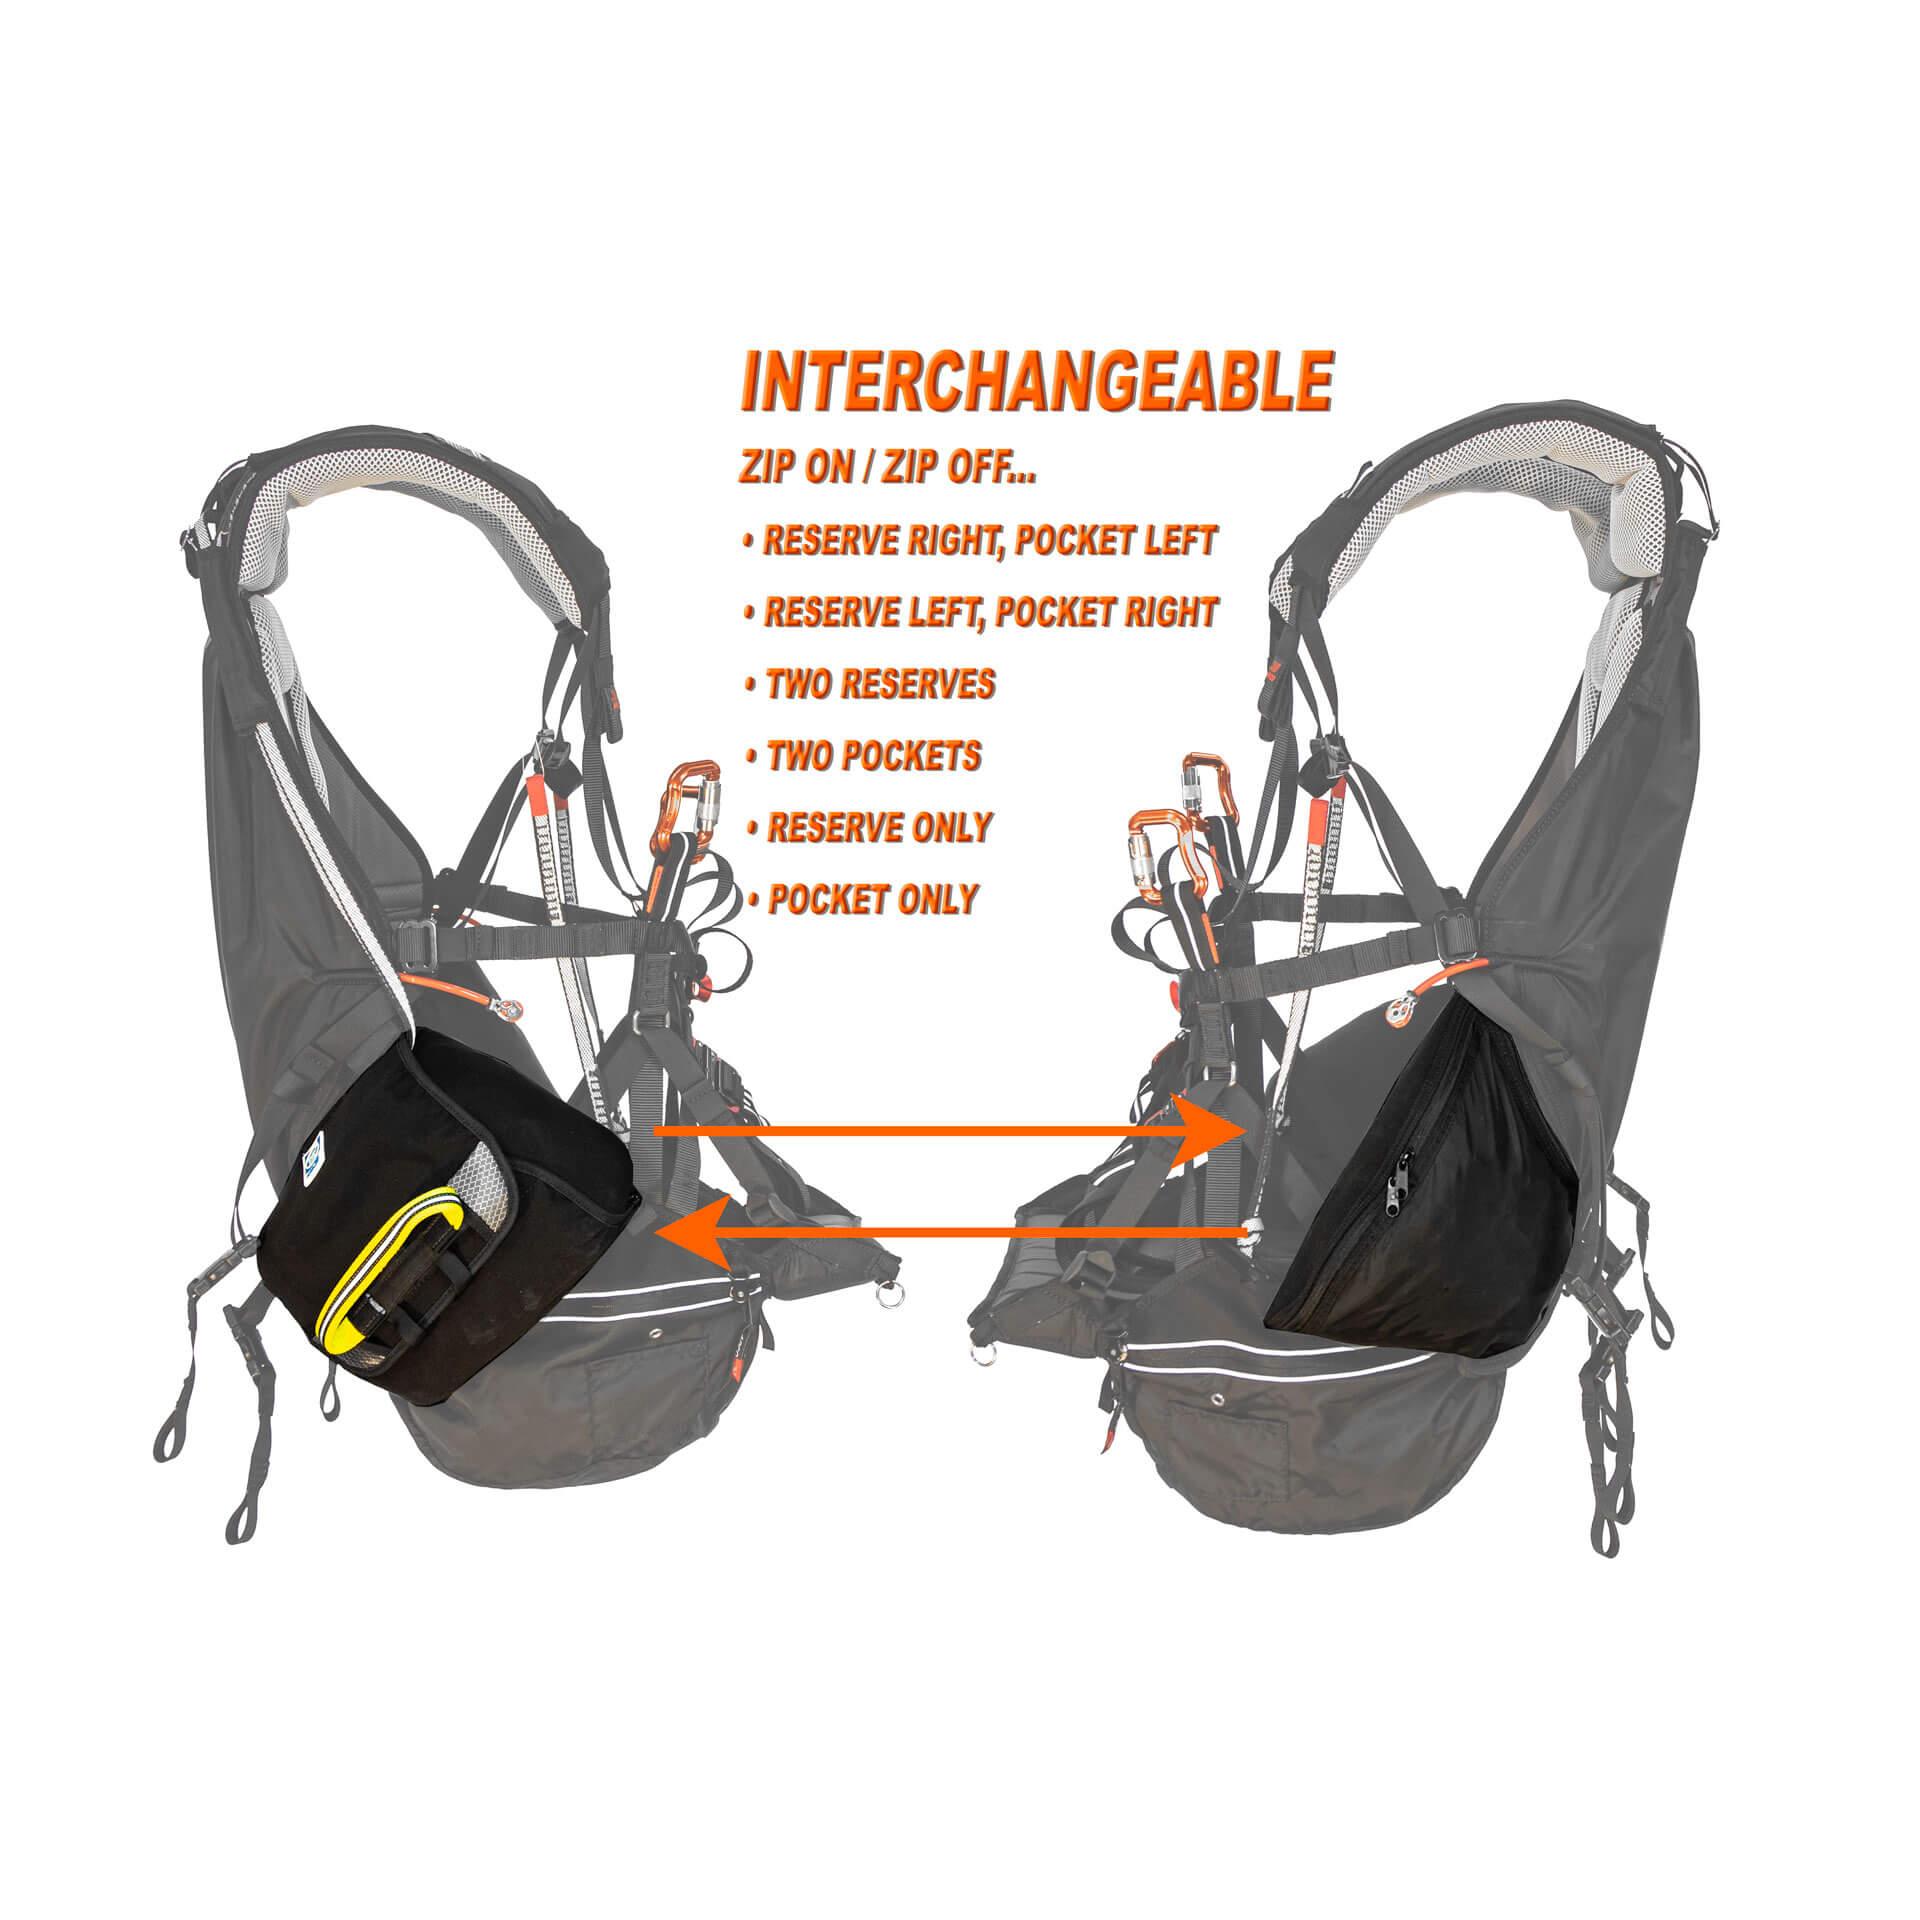 Unzipped EP compartment for SLT Low harness